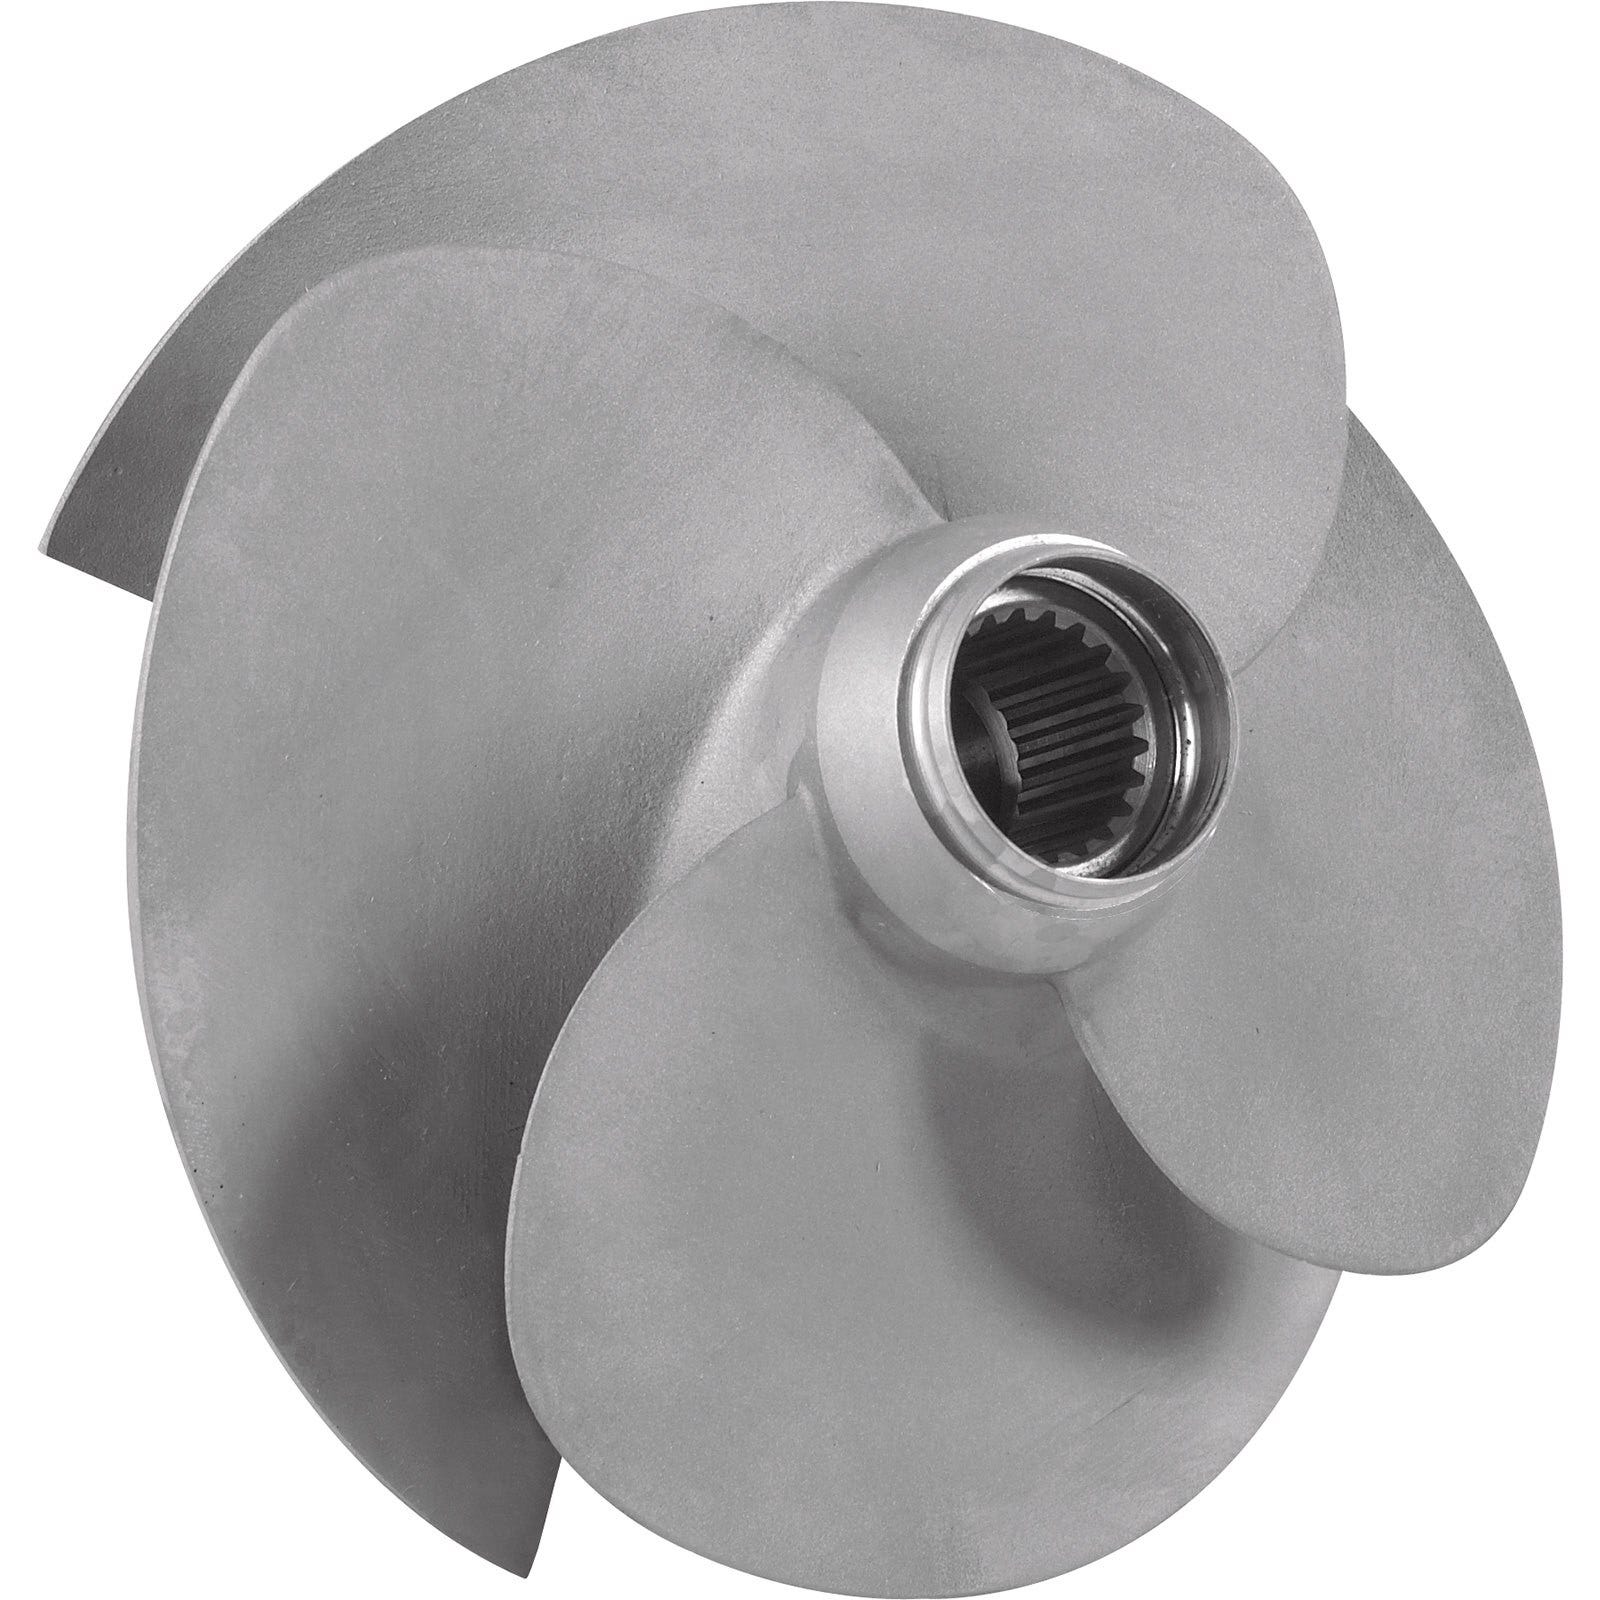 GTX Ltd 230 and WAKE PRO 230 (2017) Impeller - 267000954 - The Parts Lodge